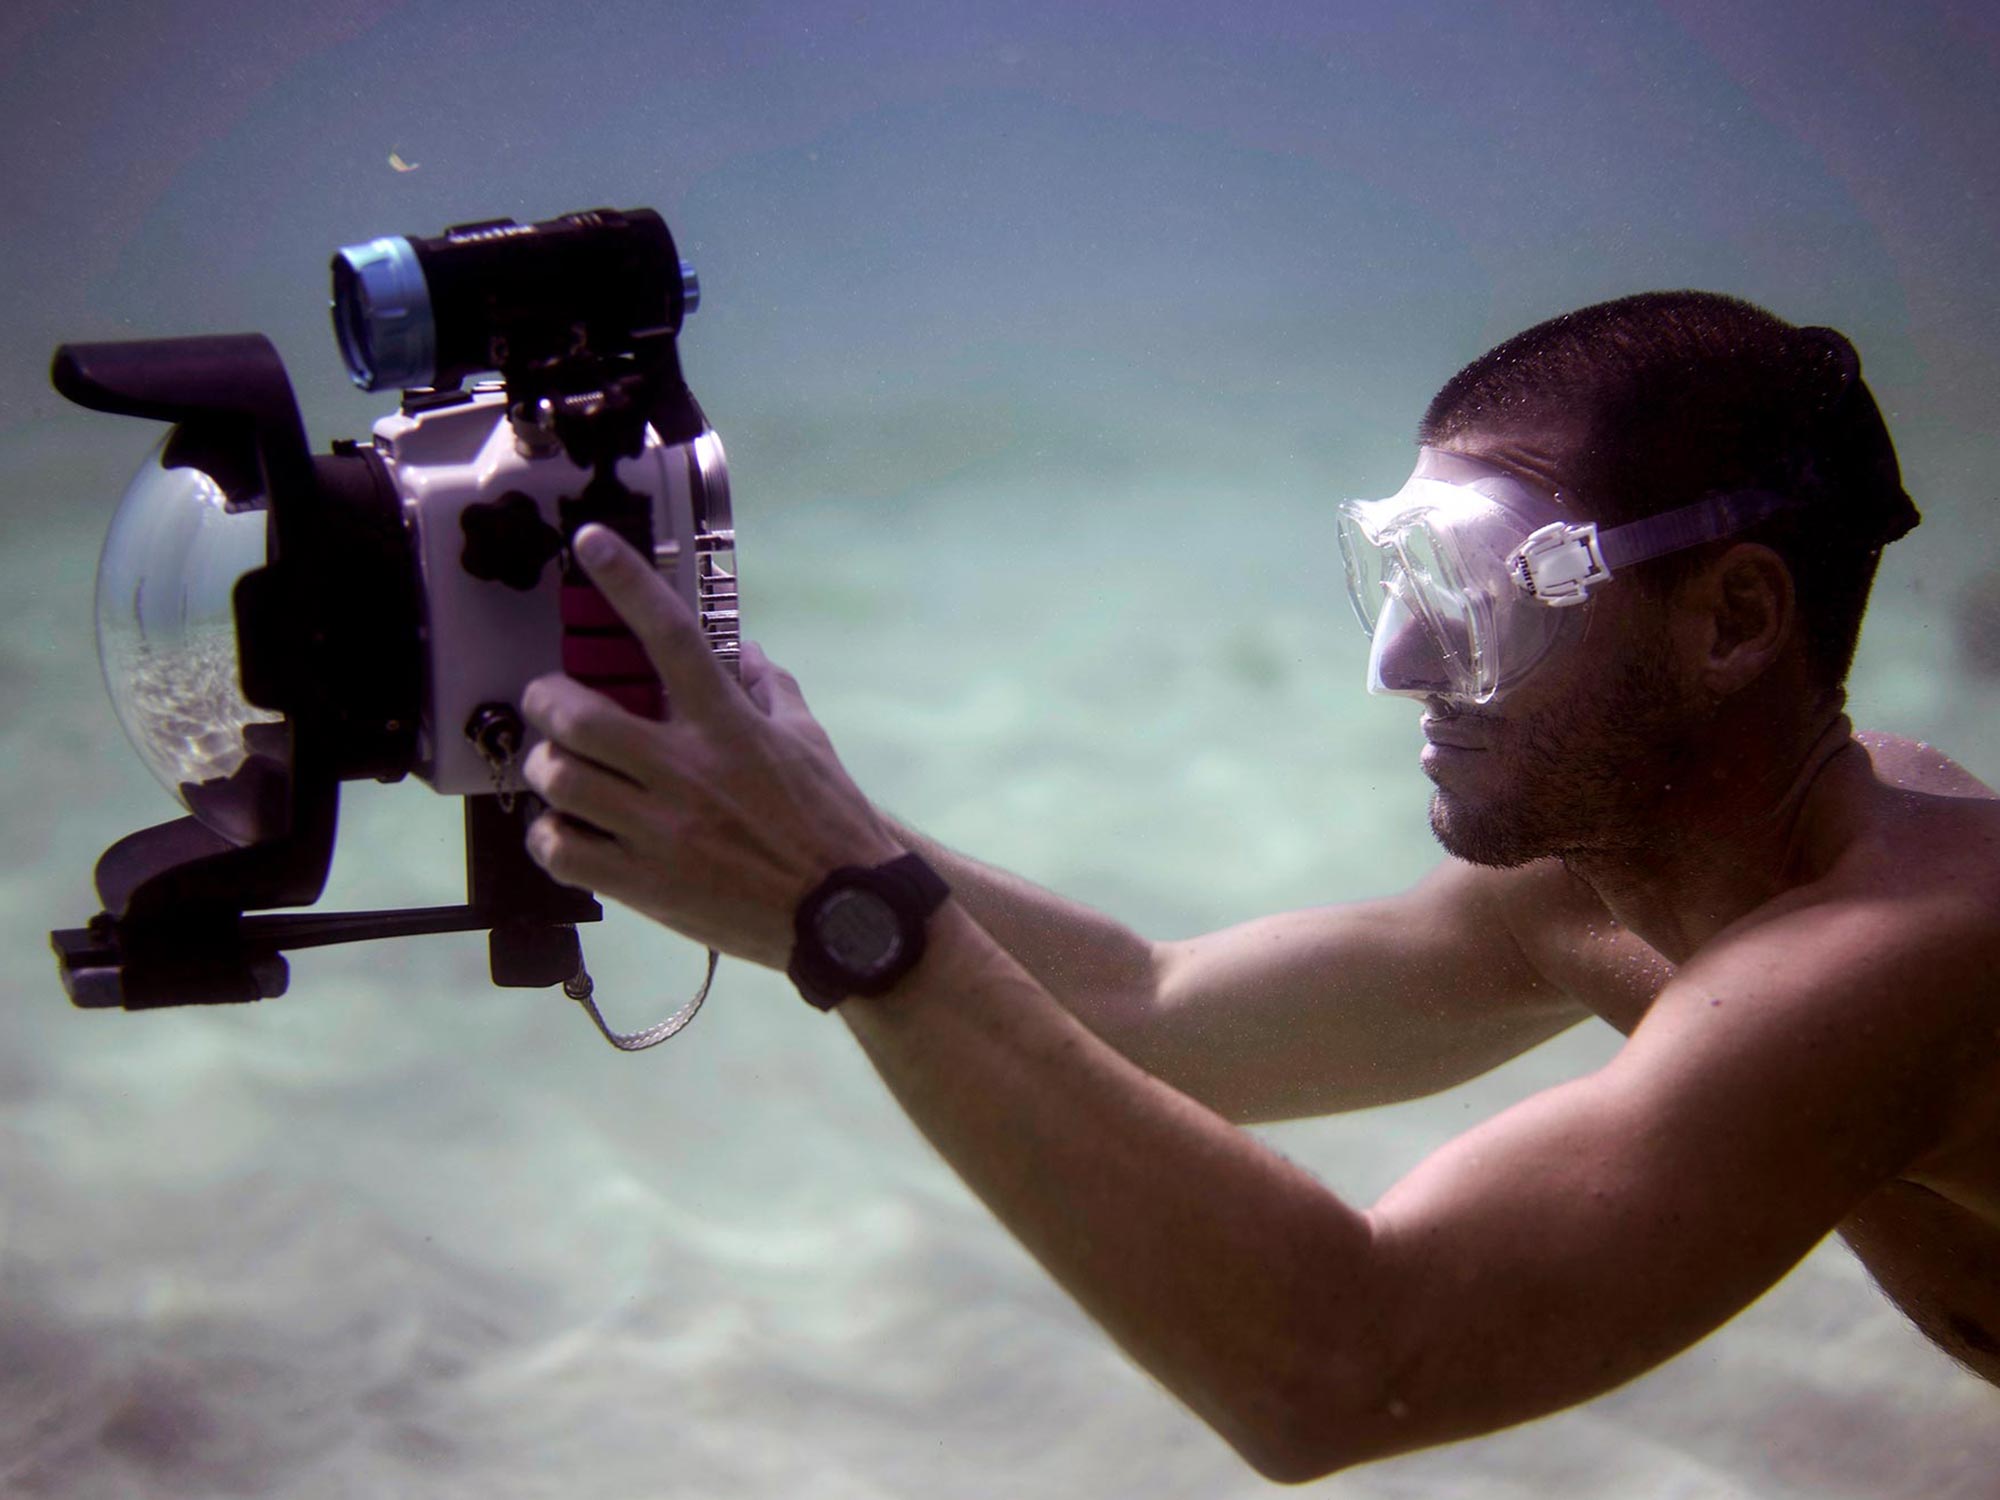 Behind the Scenes of a Short Film About Freediving